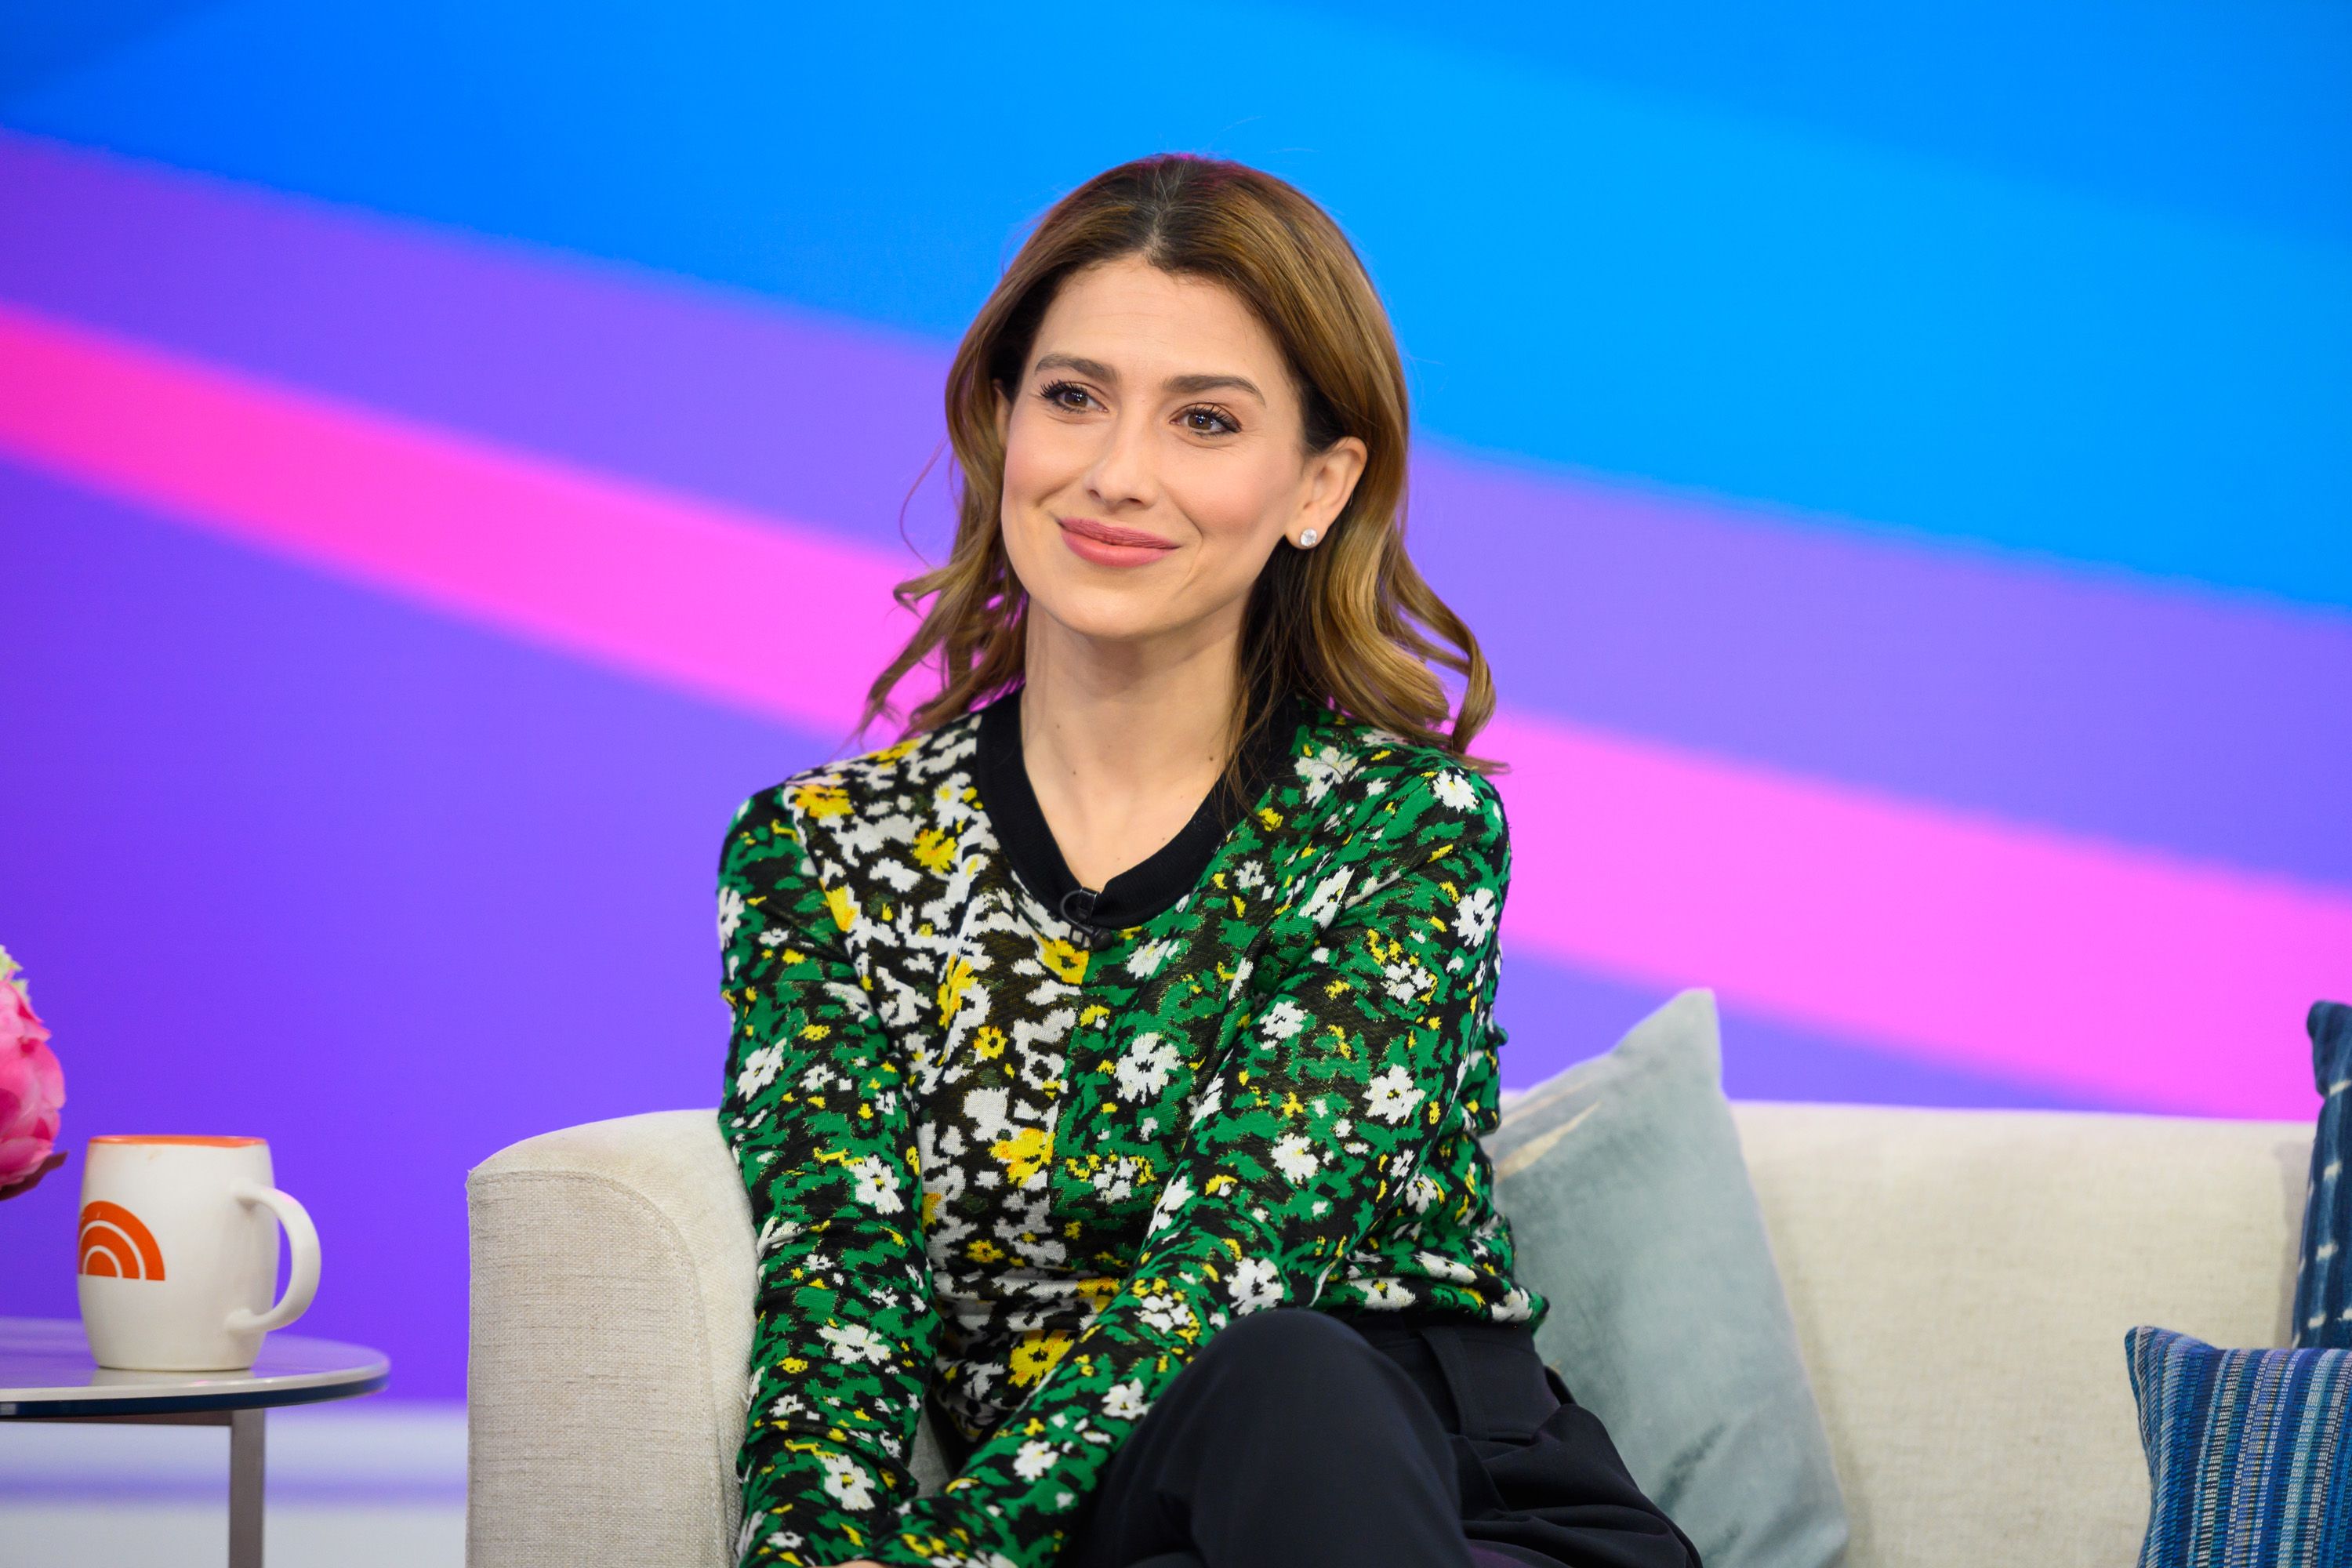 Hilaria Baldwin on the "Today" show on April 9, 2019 | Photo: Nathan Congleton/NBCU Photo Bank/NBCUniversal/Getty Images